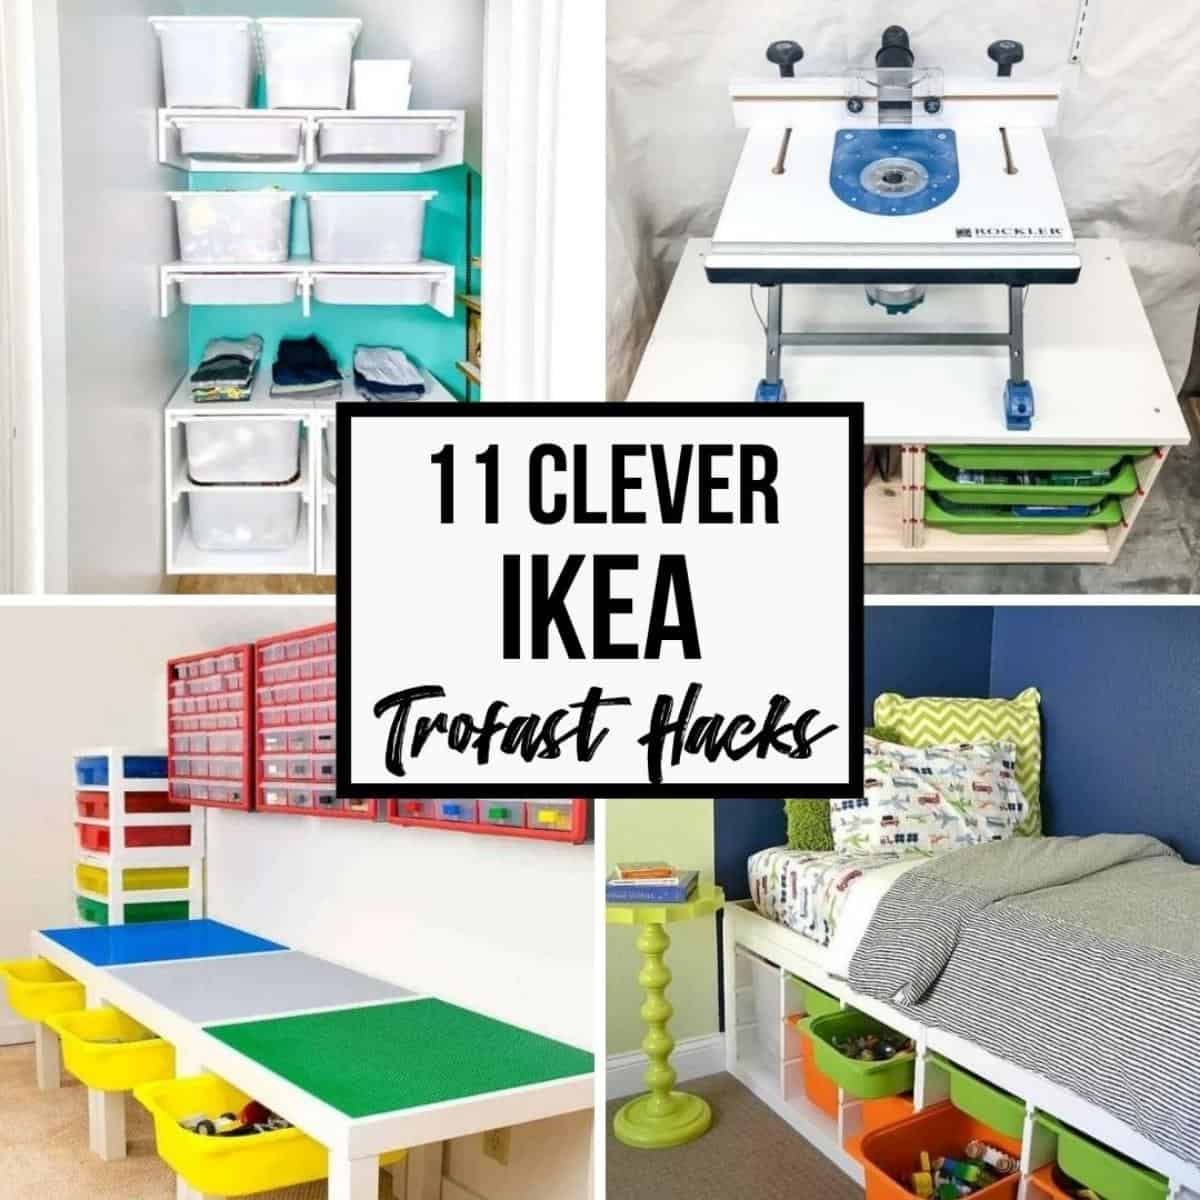 https://www.thehandymansdaughter.com/wp-content/uploads/2022/01/IKEA-Trofast-hacks-featured-image.jpeg